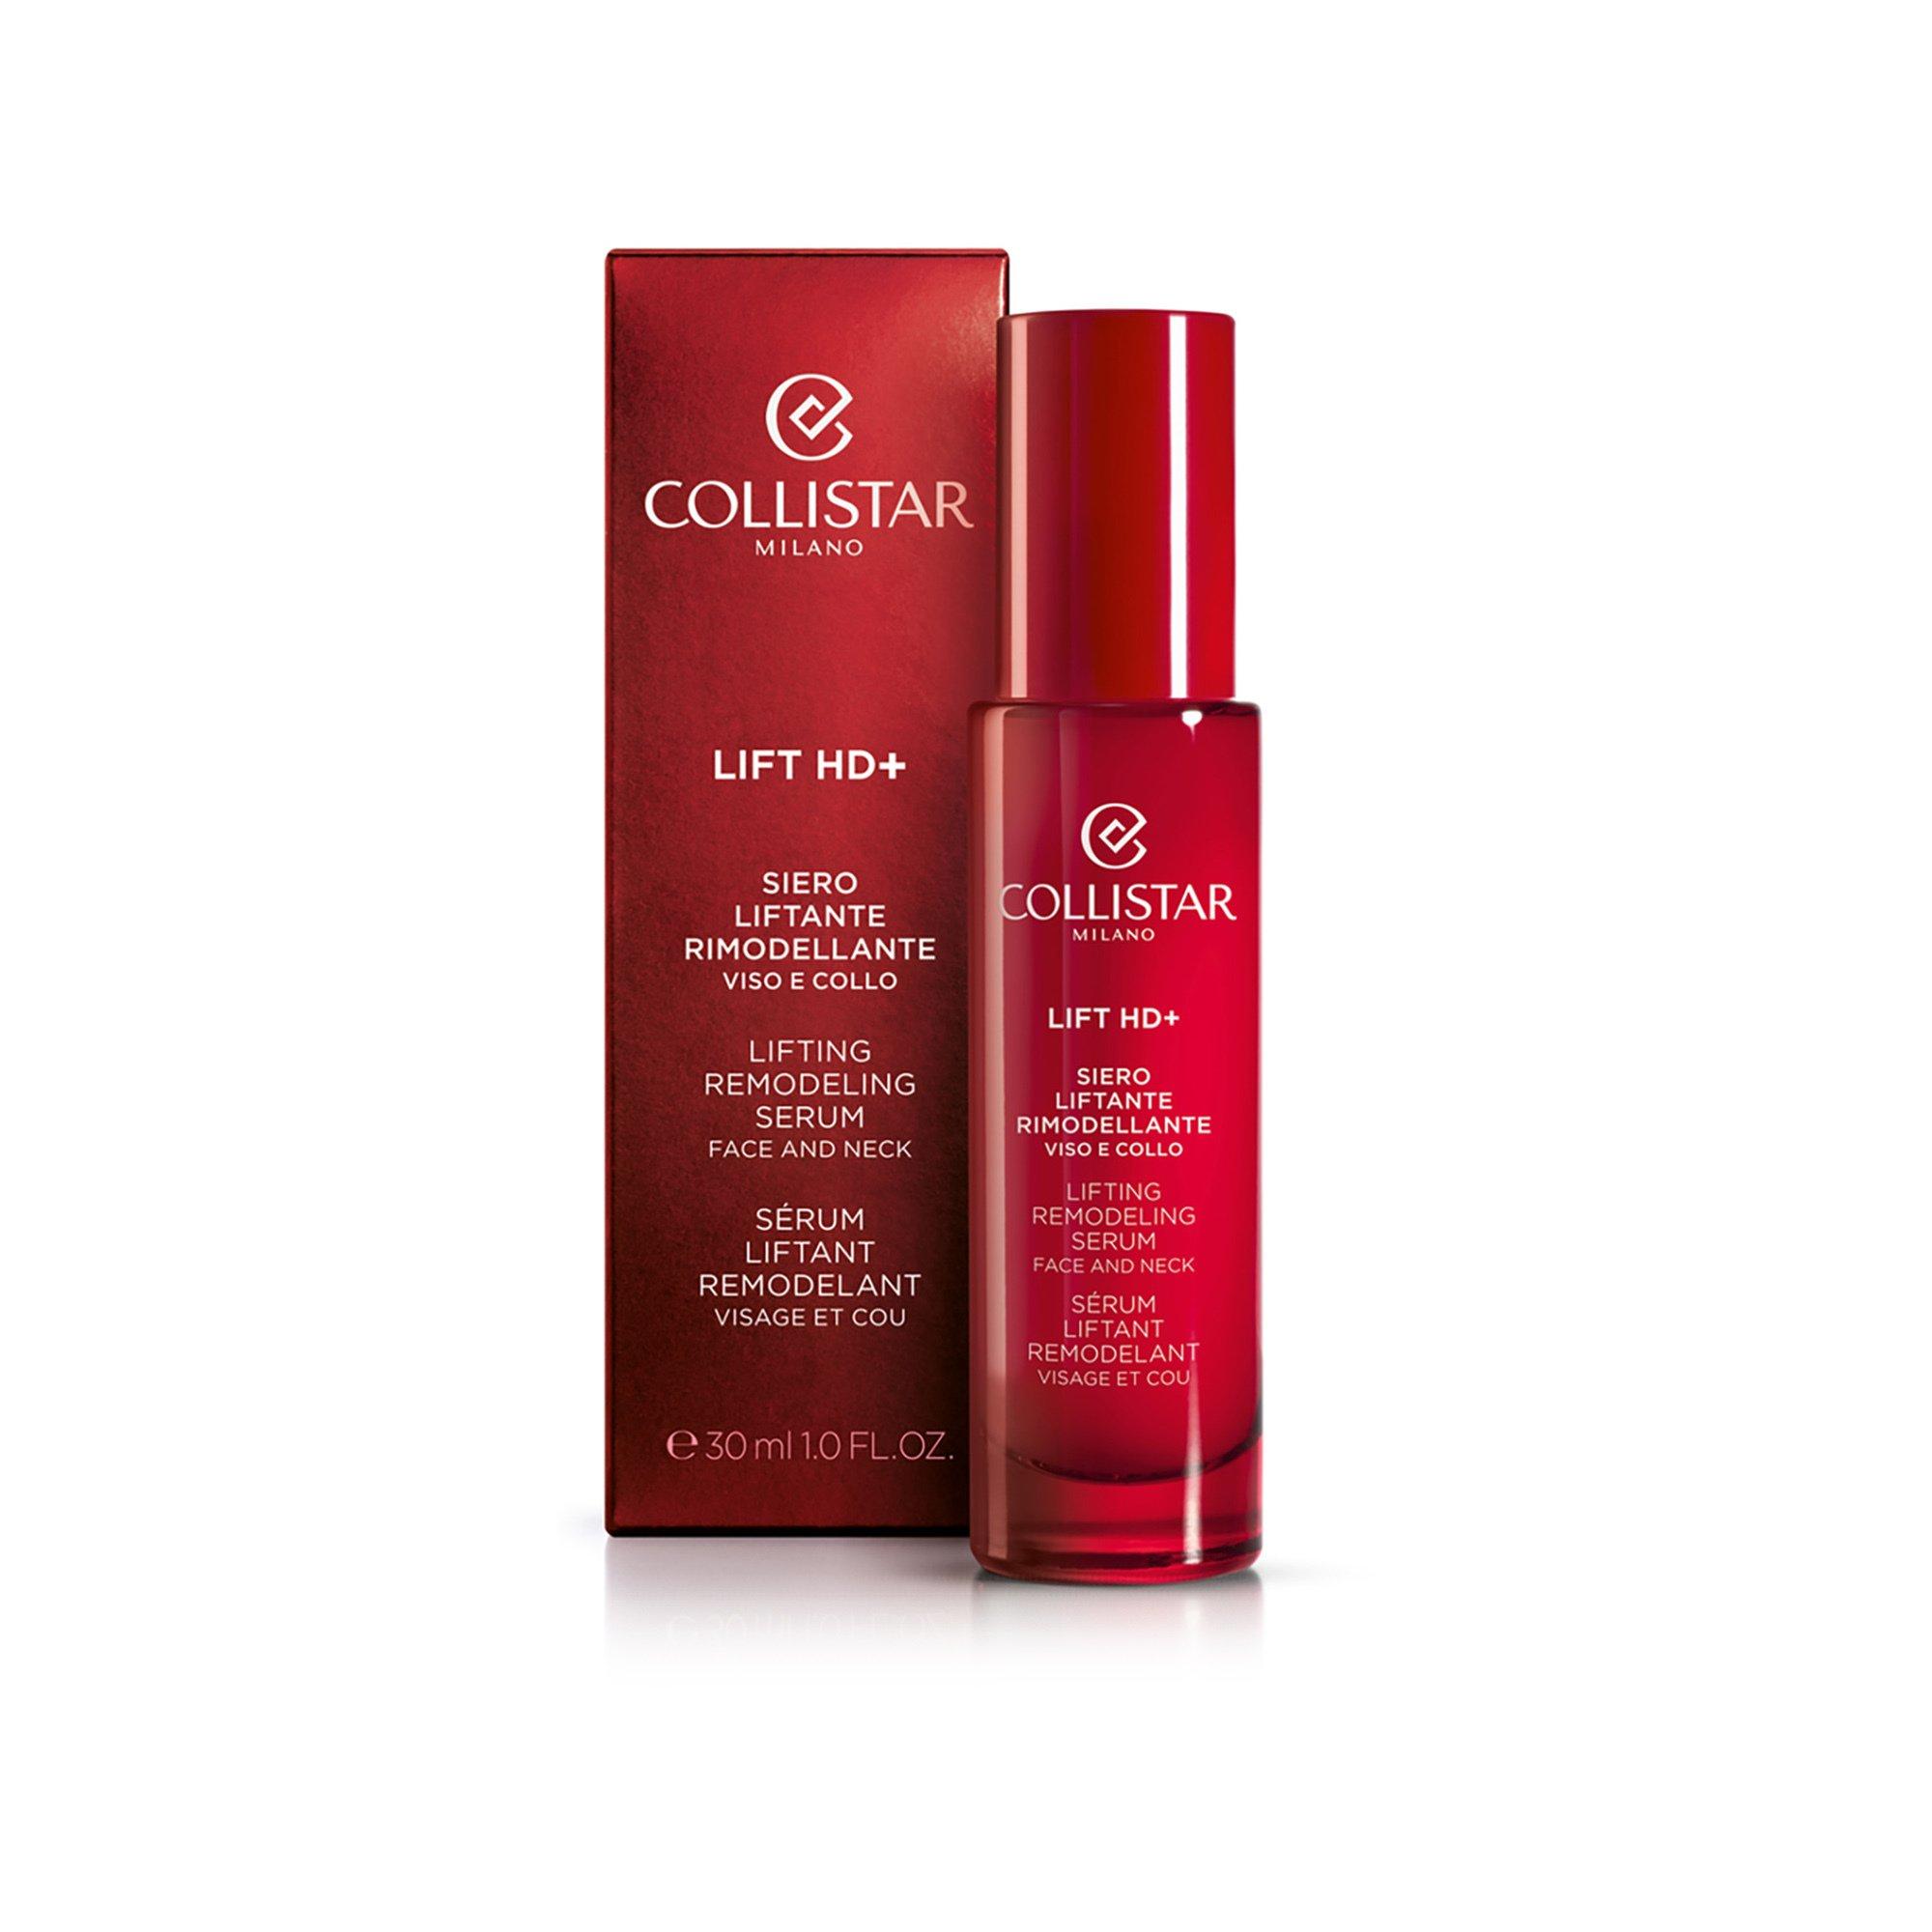 COLLISTAR  Lift HD+ Lifting Remodeling Serum Face and Neck 